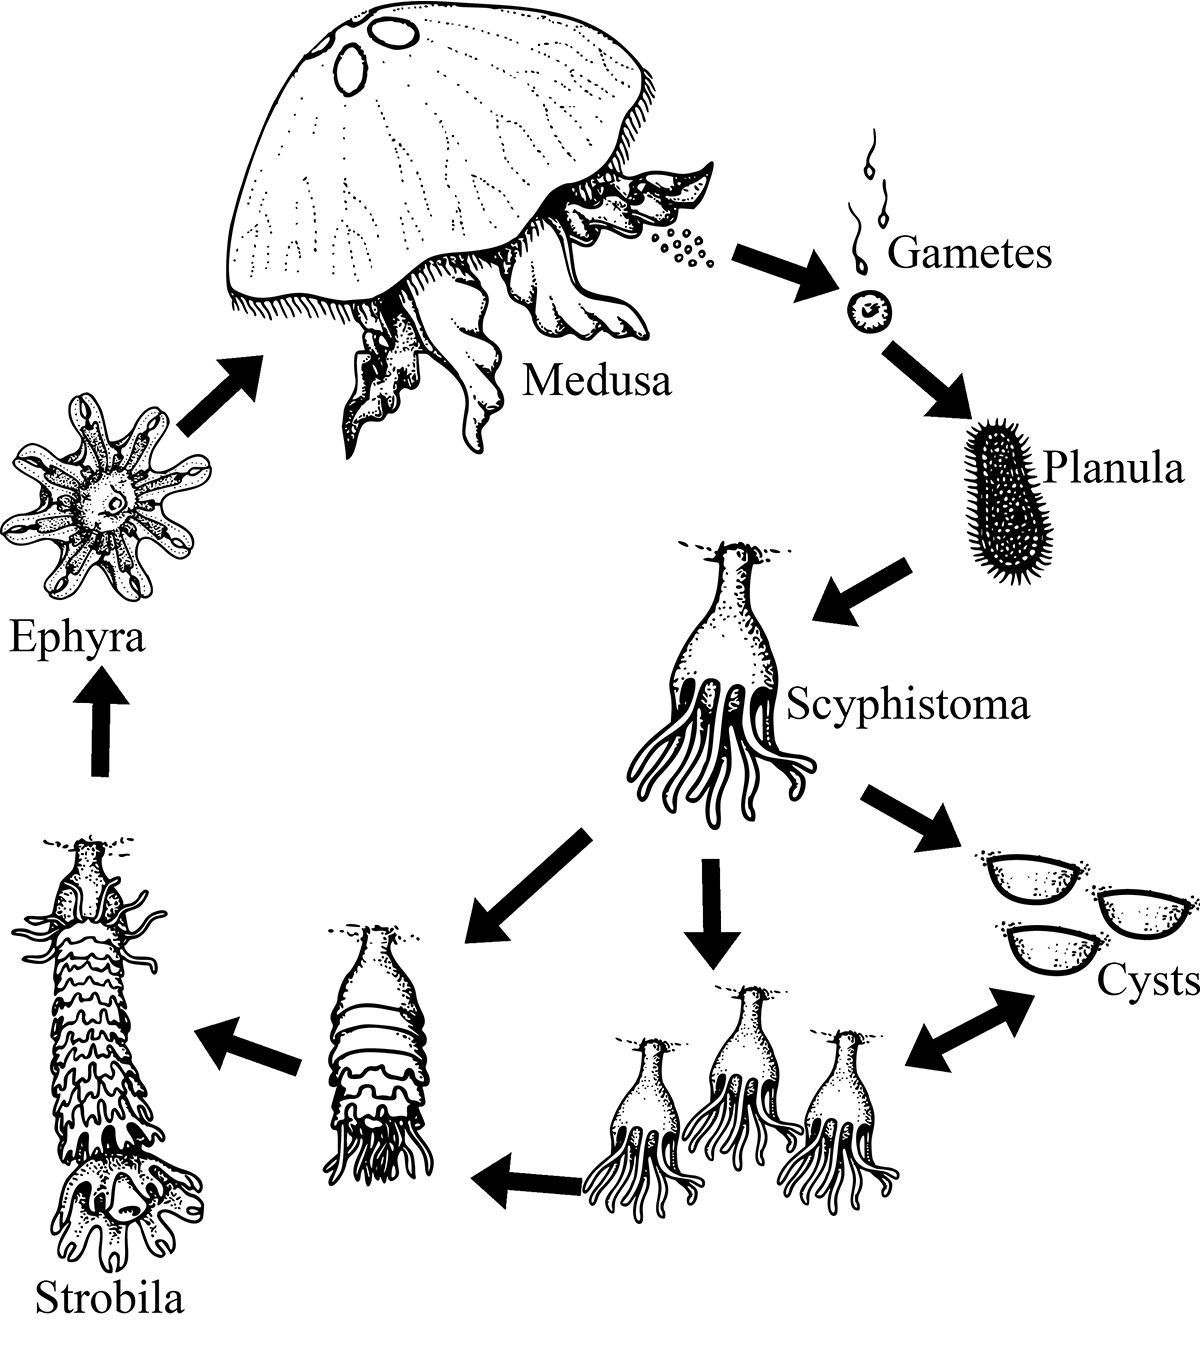 Life cycle of the moon jellyfish. Adapted from BIODIDAC